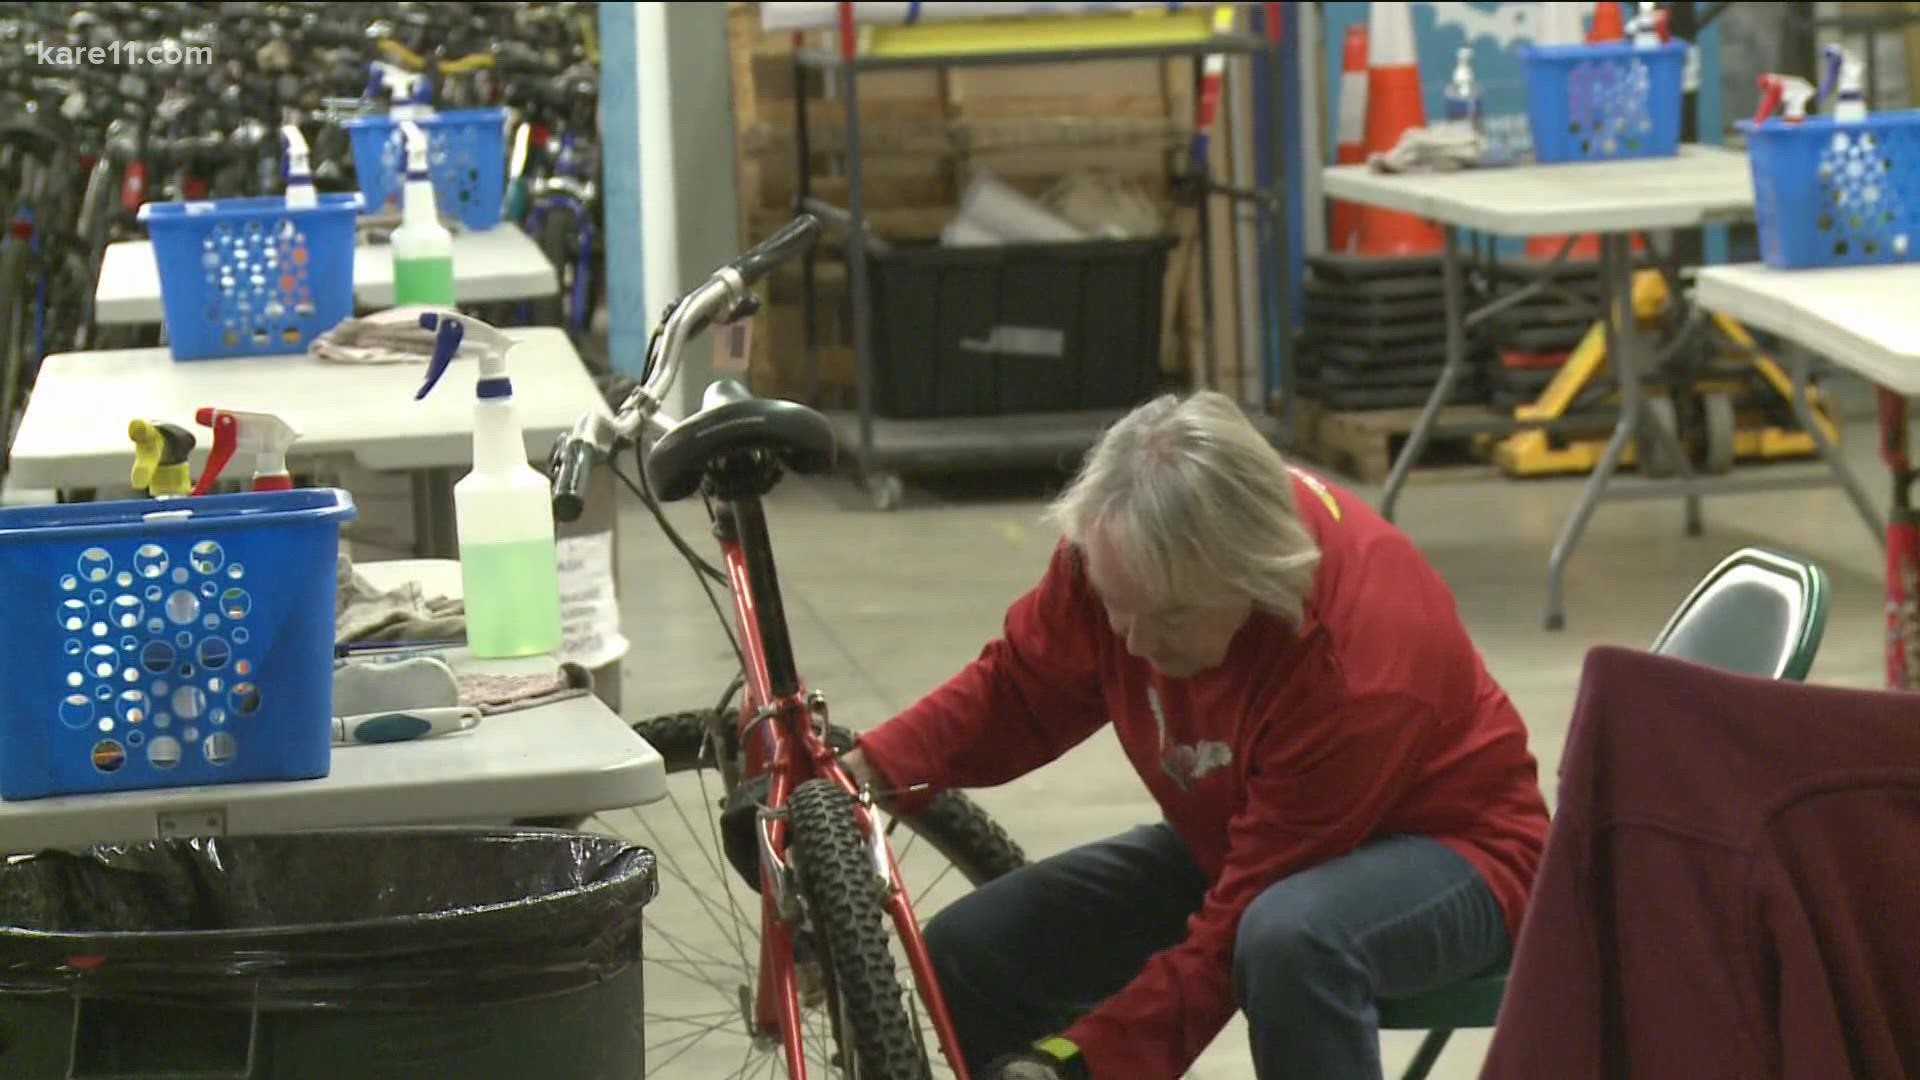 Free Bikes 4 Kidz says staff will lose a week of work to clean up the mess, and that at least 300 kids could be impacted by the theft this holiday season.